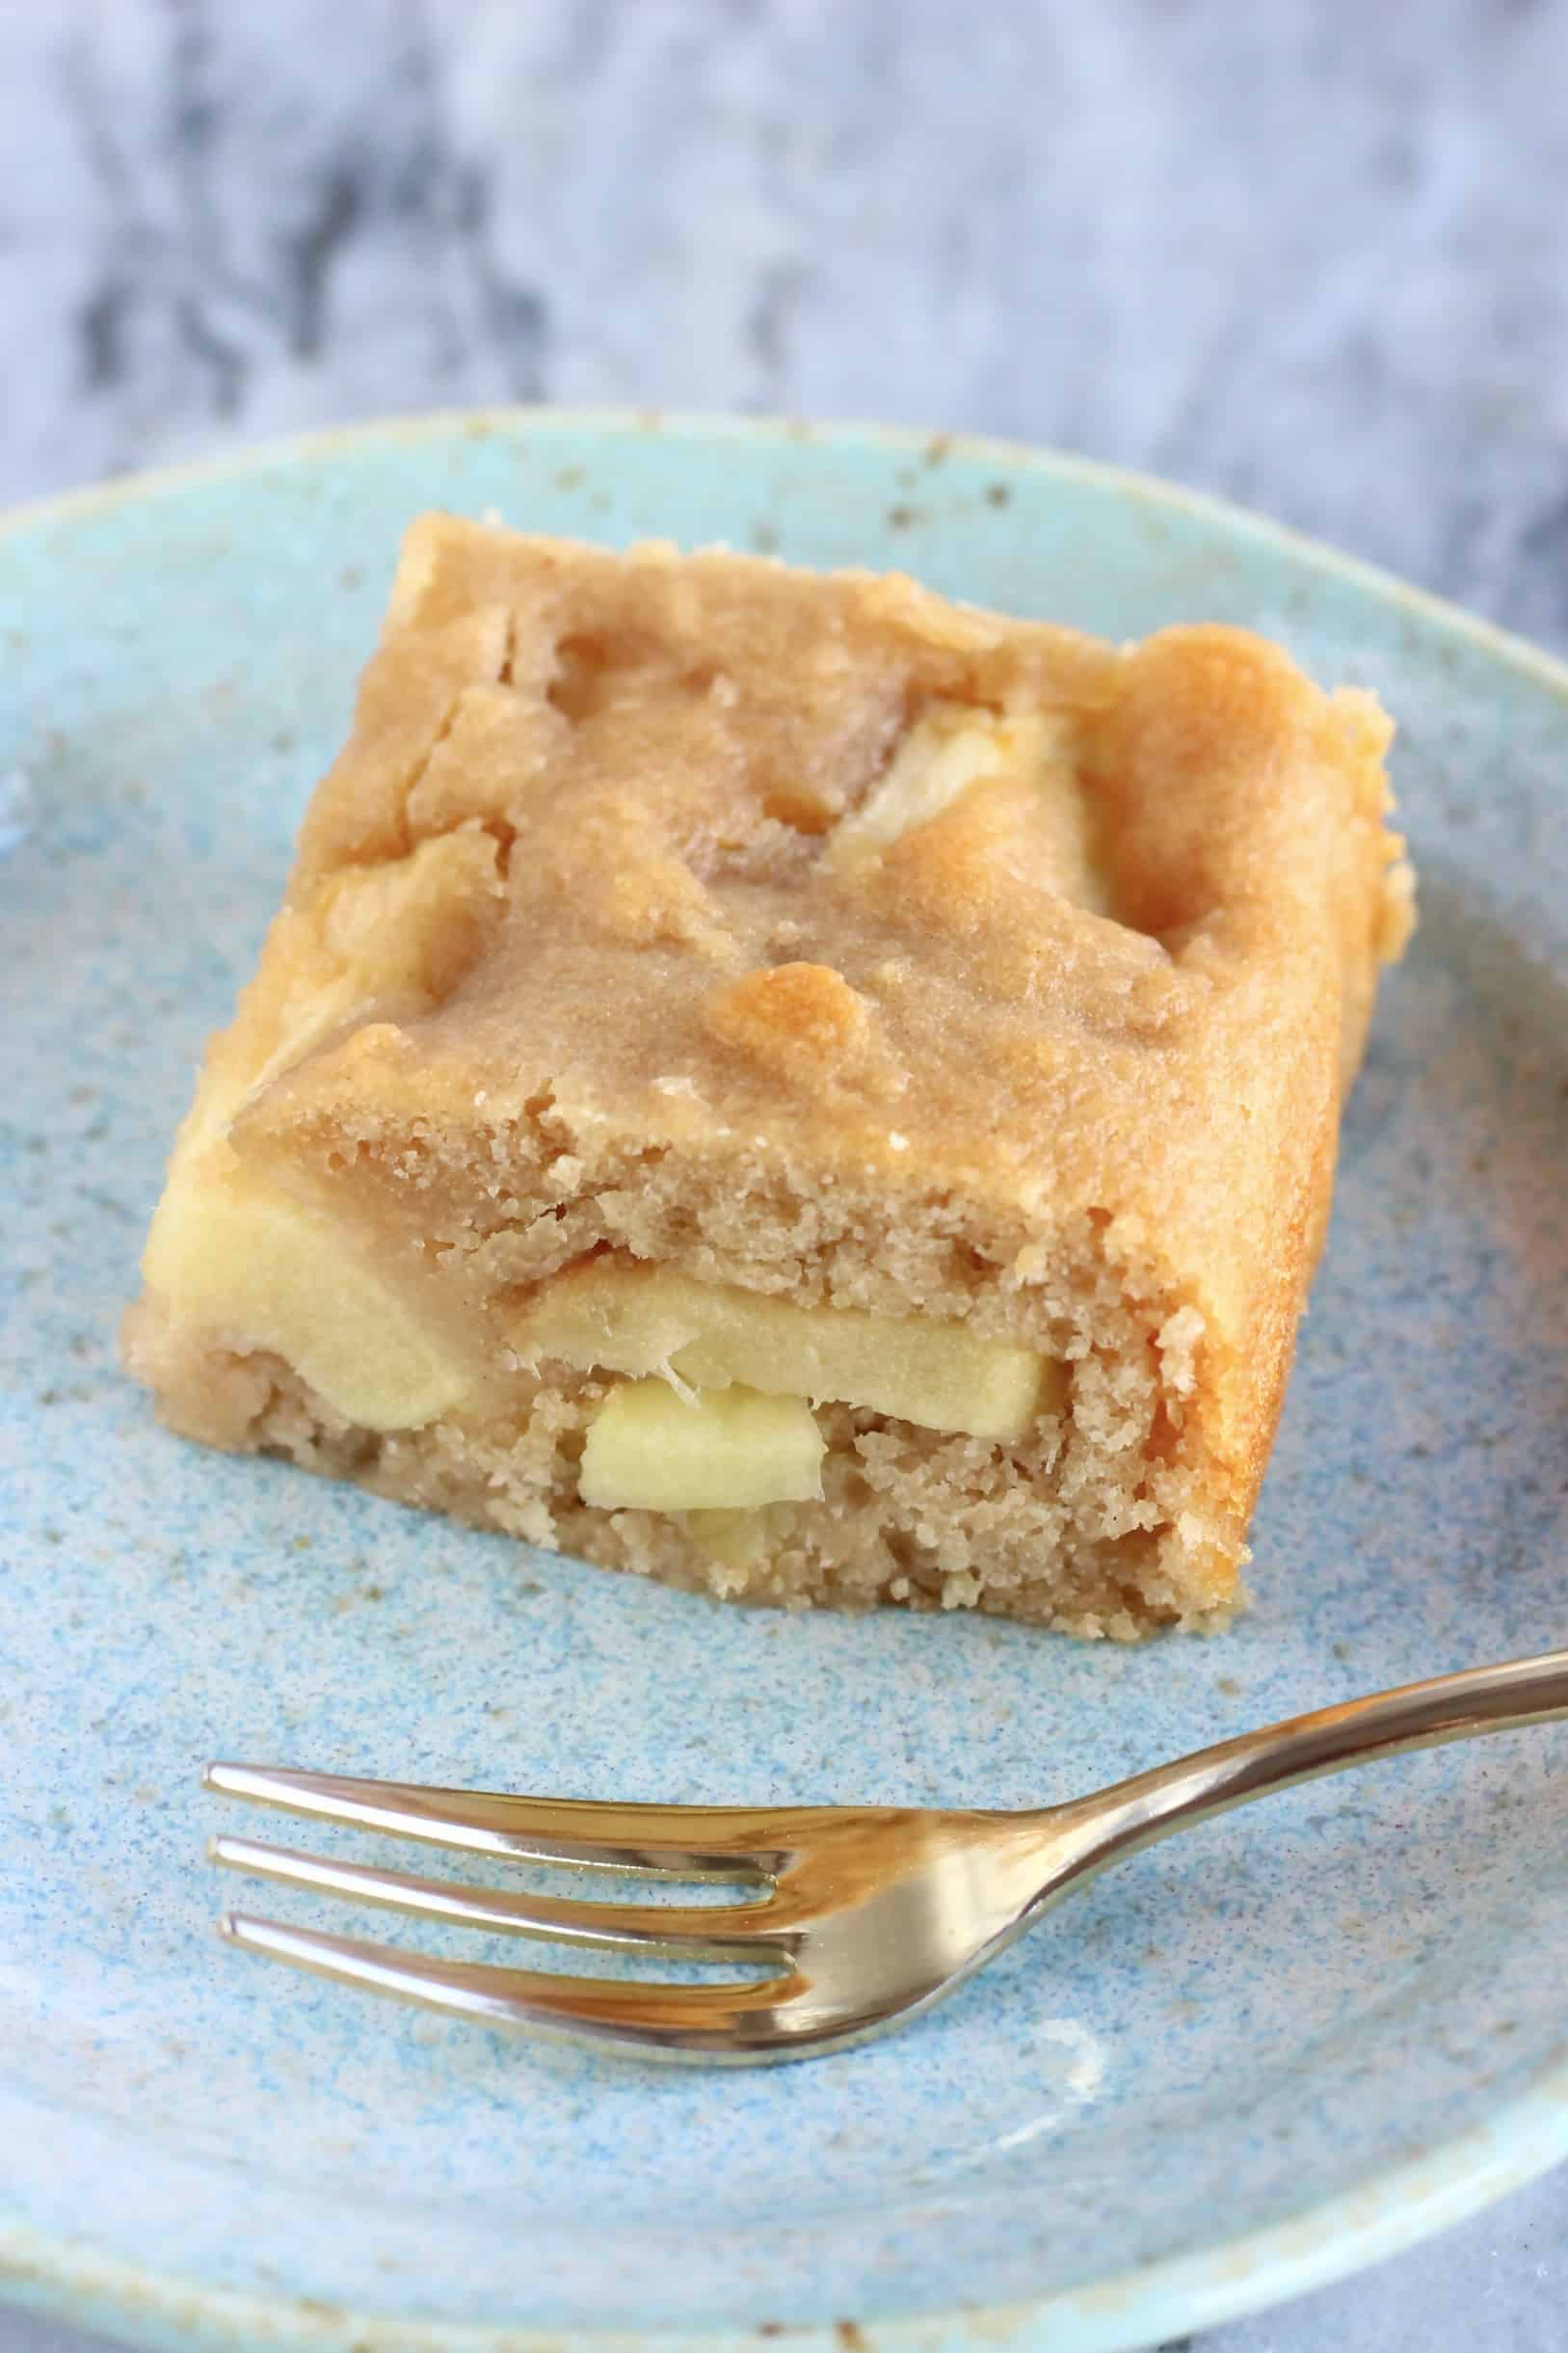 A square piece of gluten-free vegan apple snack cake on a plate with a fork